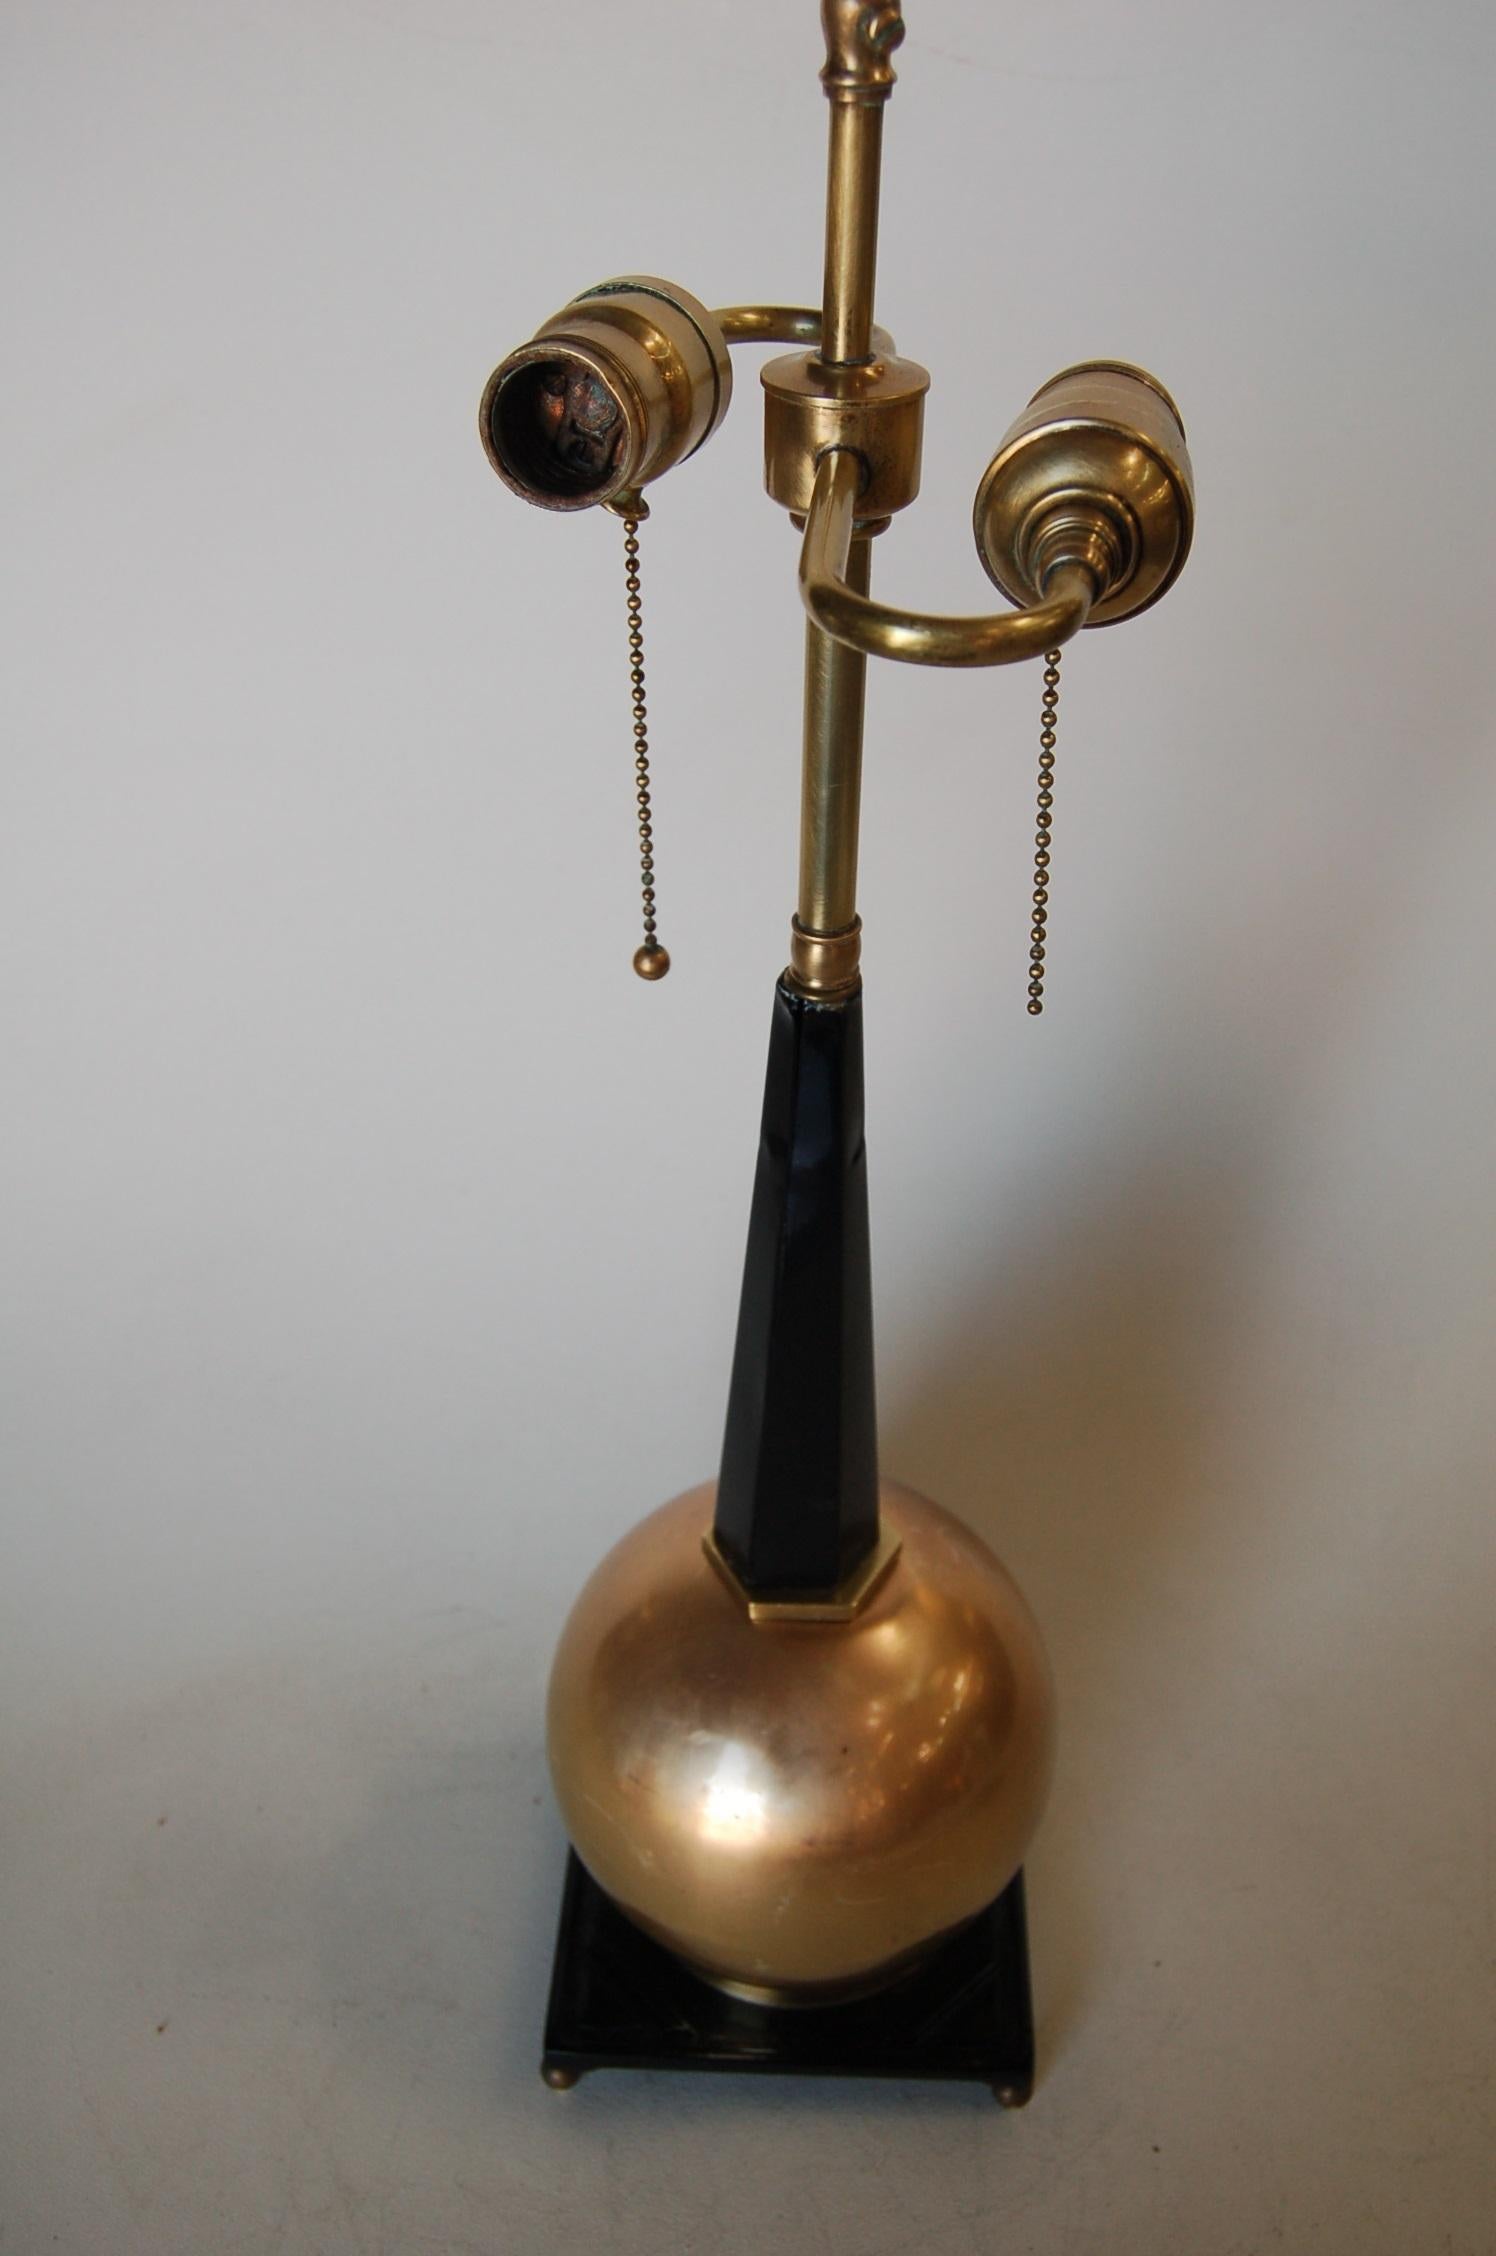 American Art Deco Empire Style Brass Ball Table Lamp by Frankart